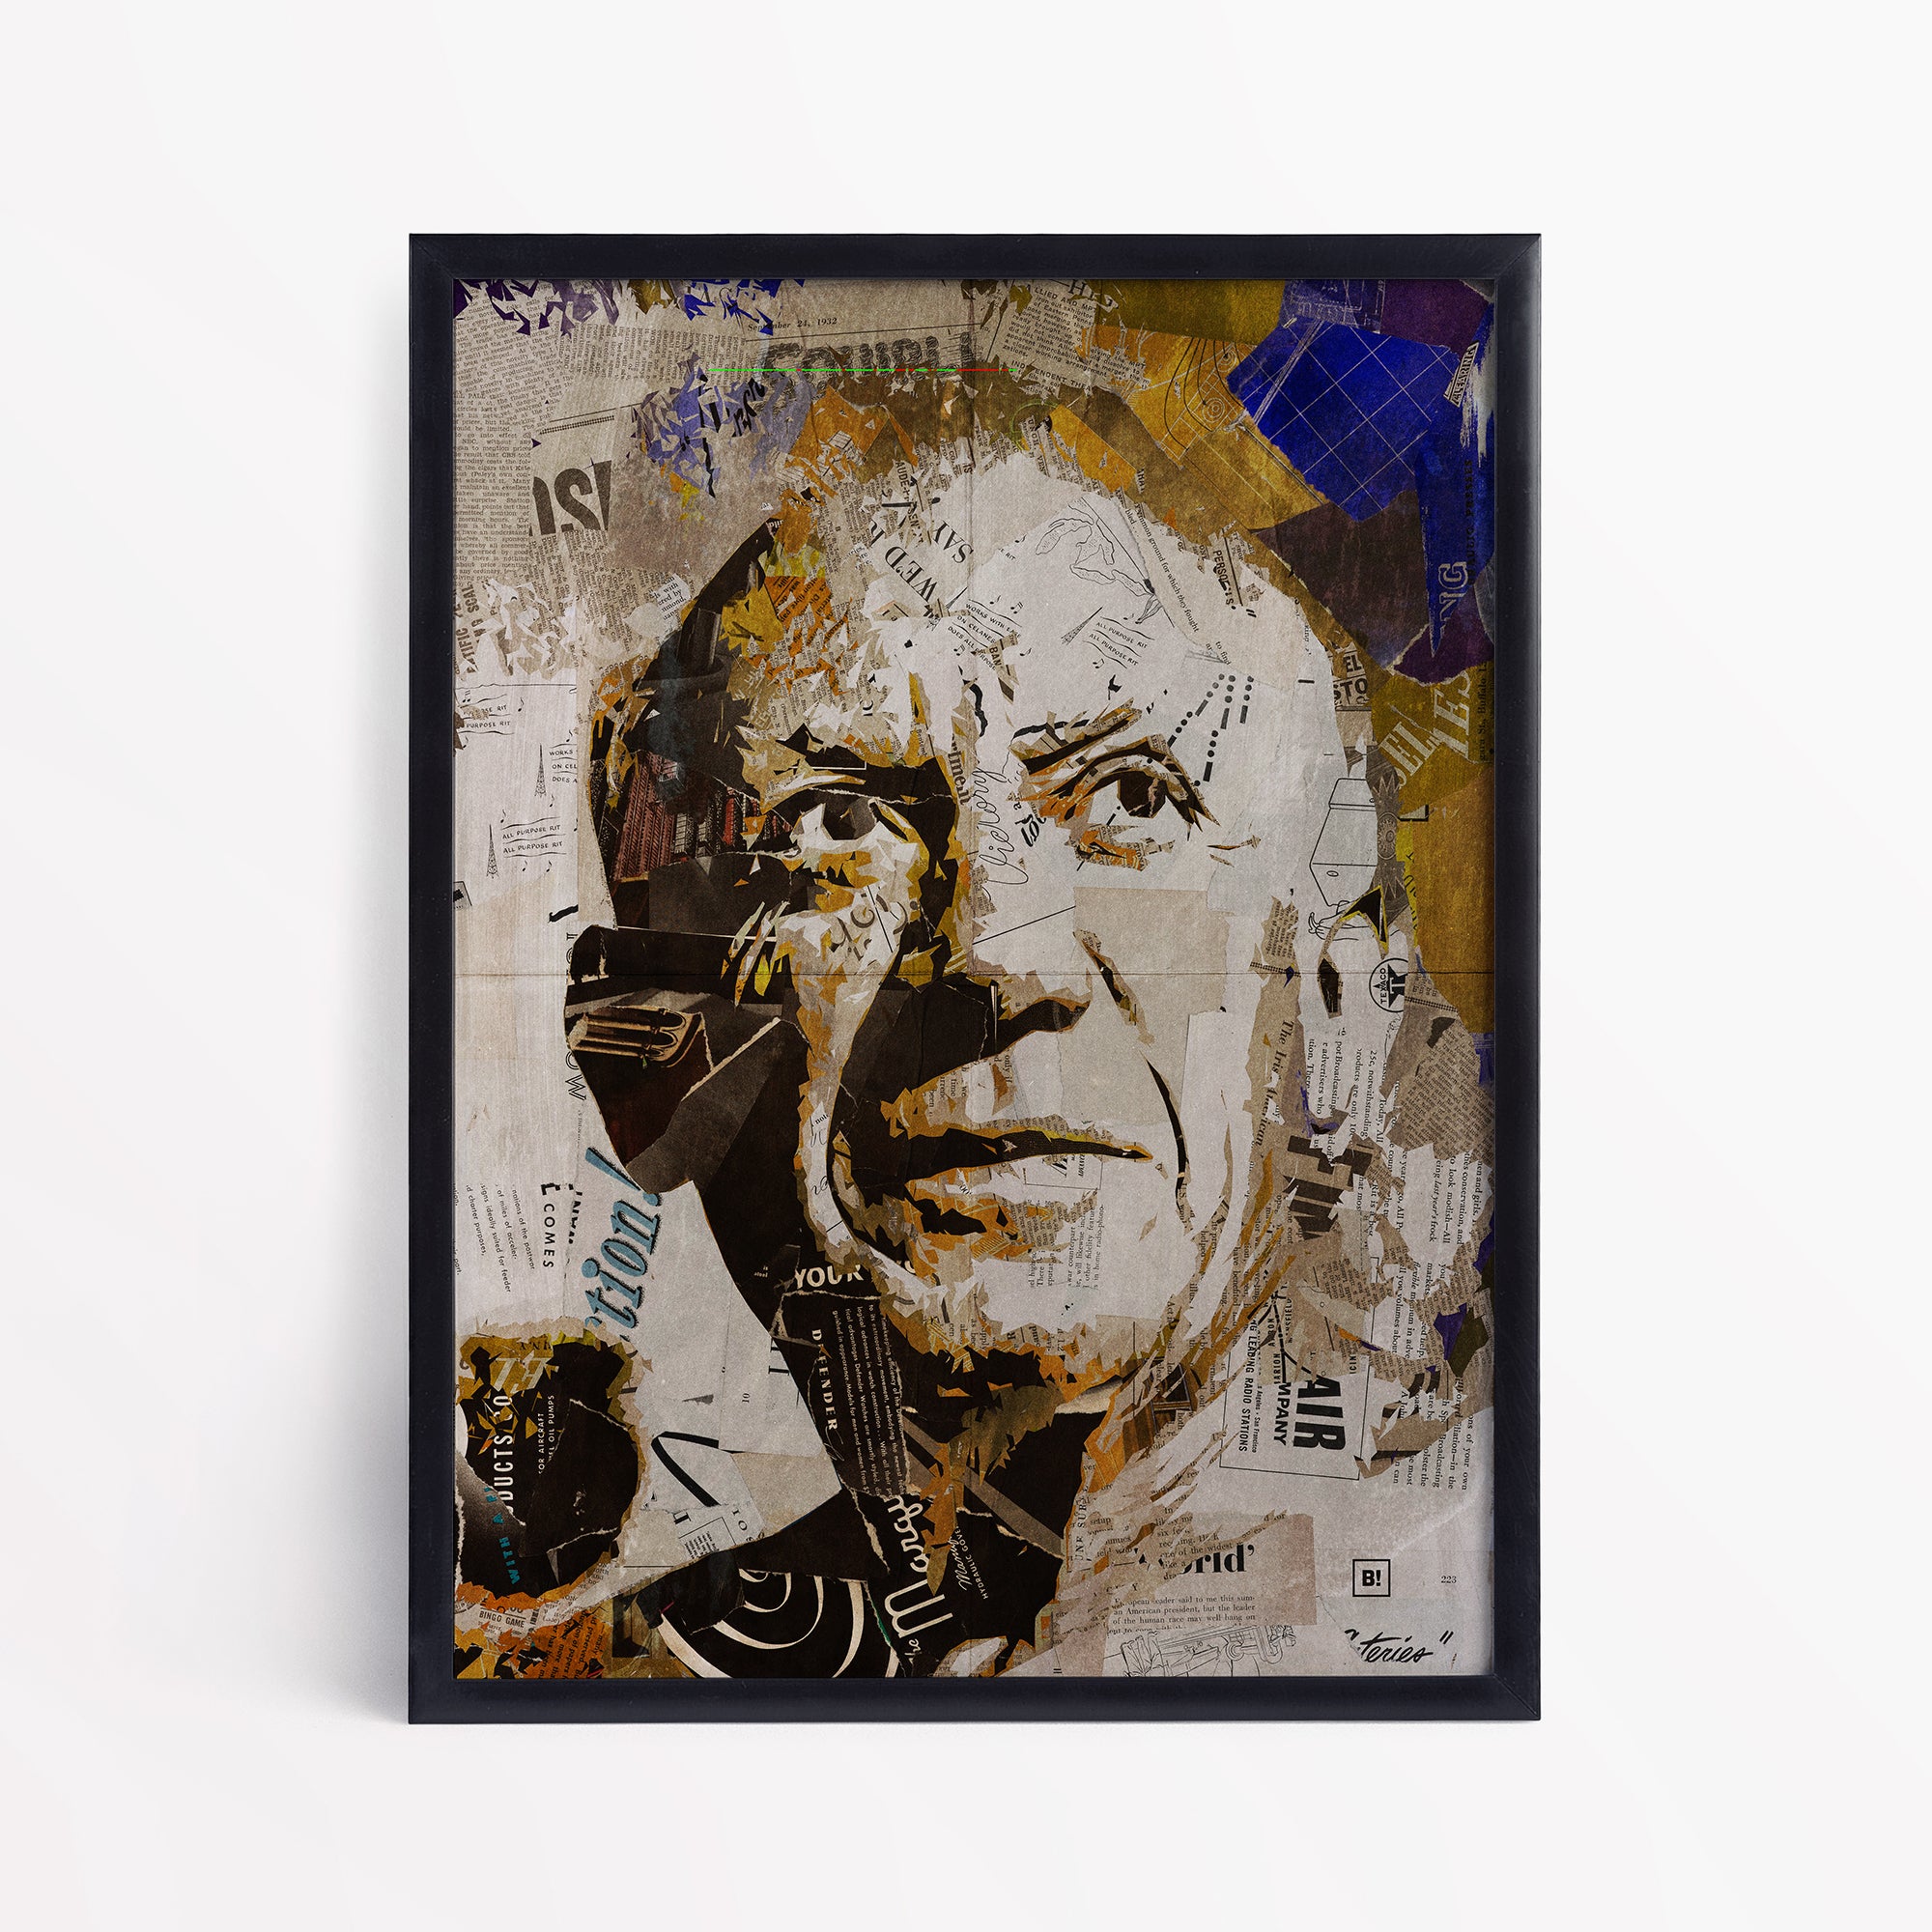 Be inspired by our iconic collage portrait art print of Pablo Picasso. This artwork has been printed using the giclée process on archival acid-free paper and is presented in a sleek black frame, showcasing its timeless beauty in every detail.